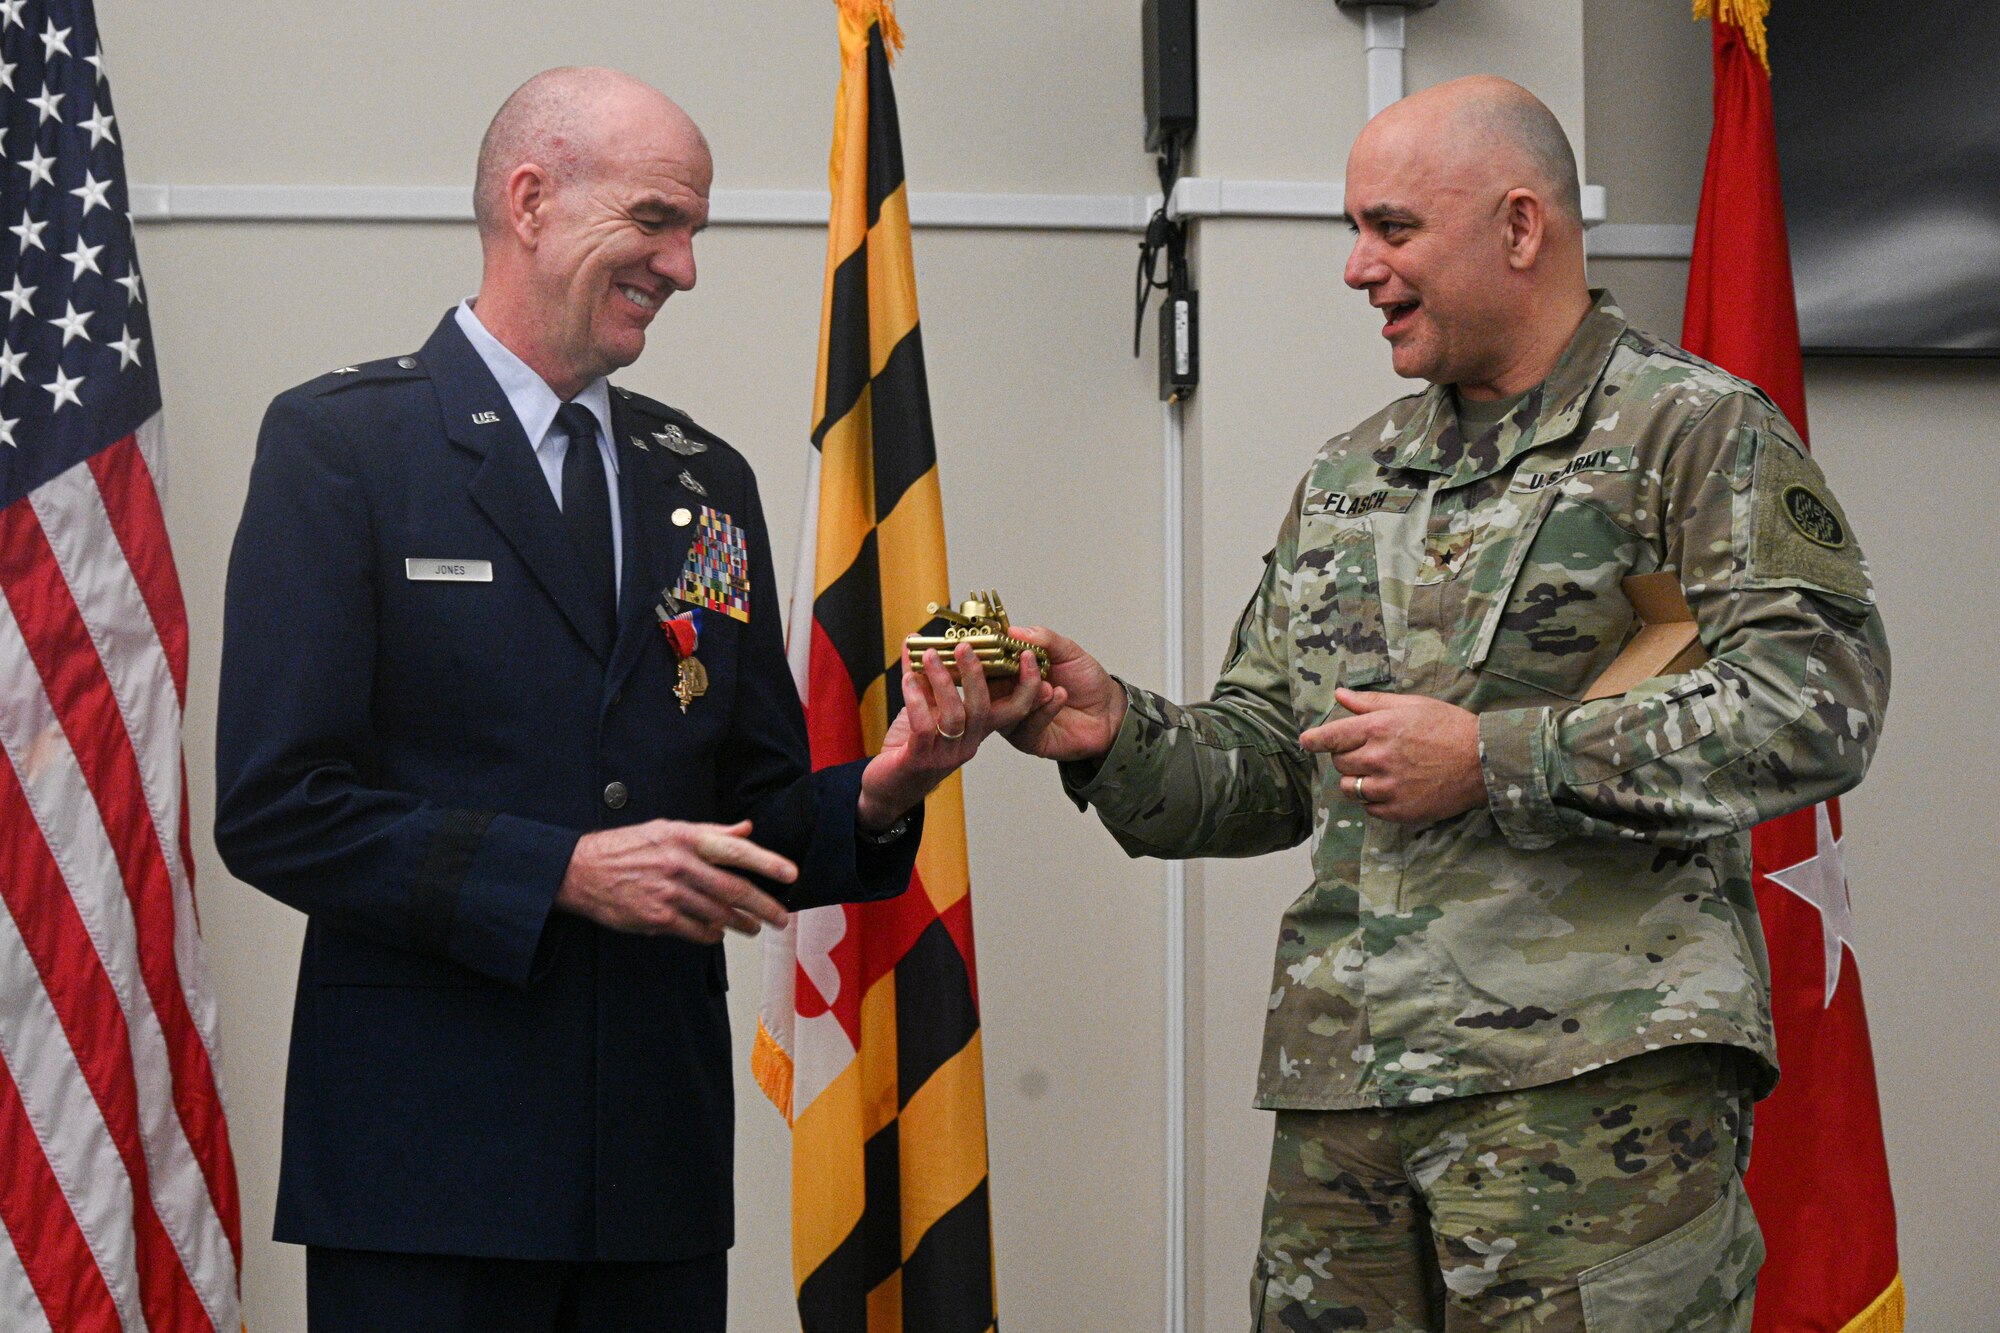 U.S. Air Force Brig. Gen. Edward Jones, assistant adjutant general-air, Maryland National Guard, is gifted with a tank crafted out of bullets by Brig. Gen. Adam R. Flasch, director of joint staff, Maryland, Feb. 11, 2023, at Warfield Air National Guard Base at Martin State Airport, Middle River, Maryland, during the retirement ceremony for Jones.